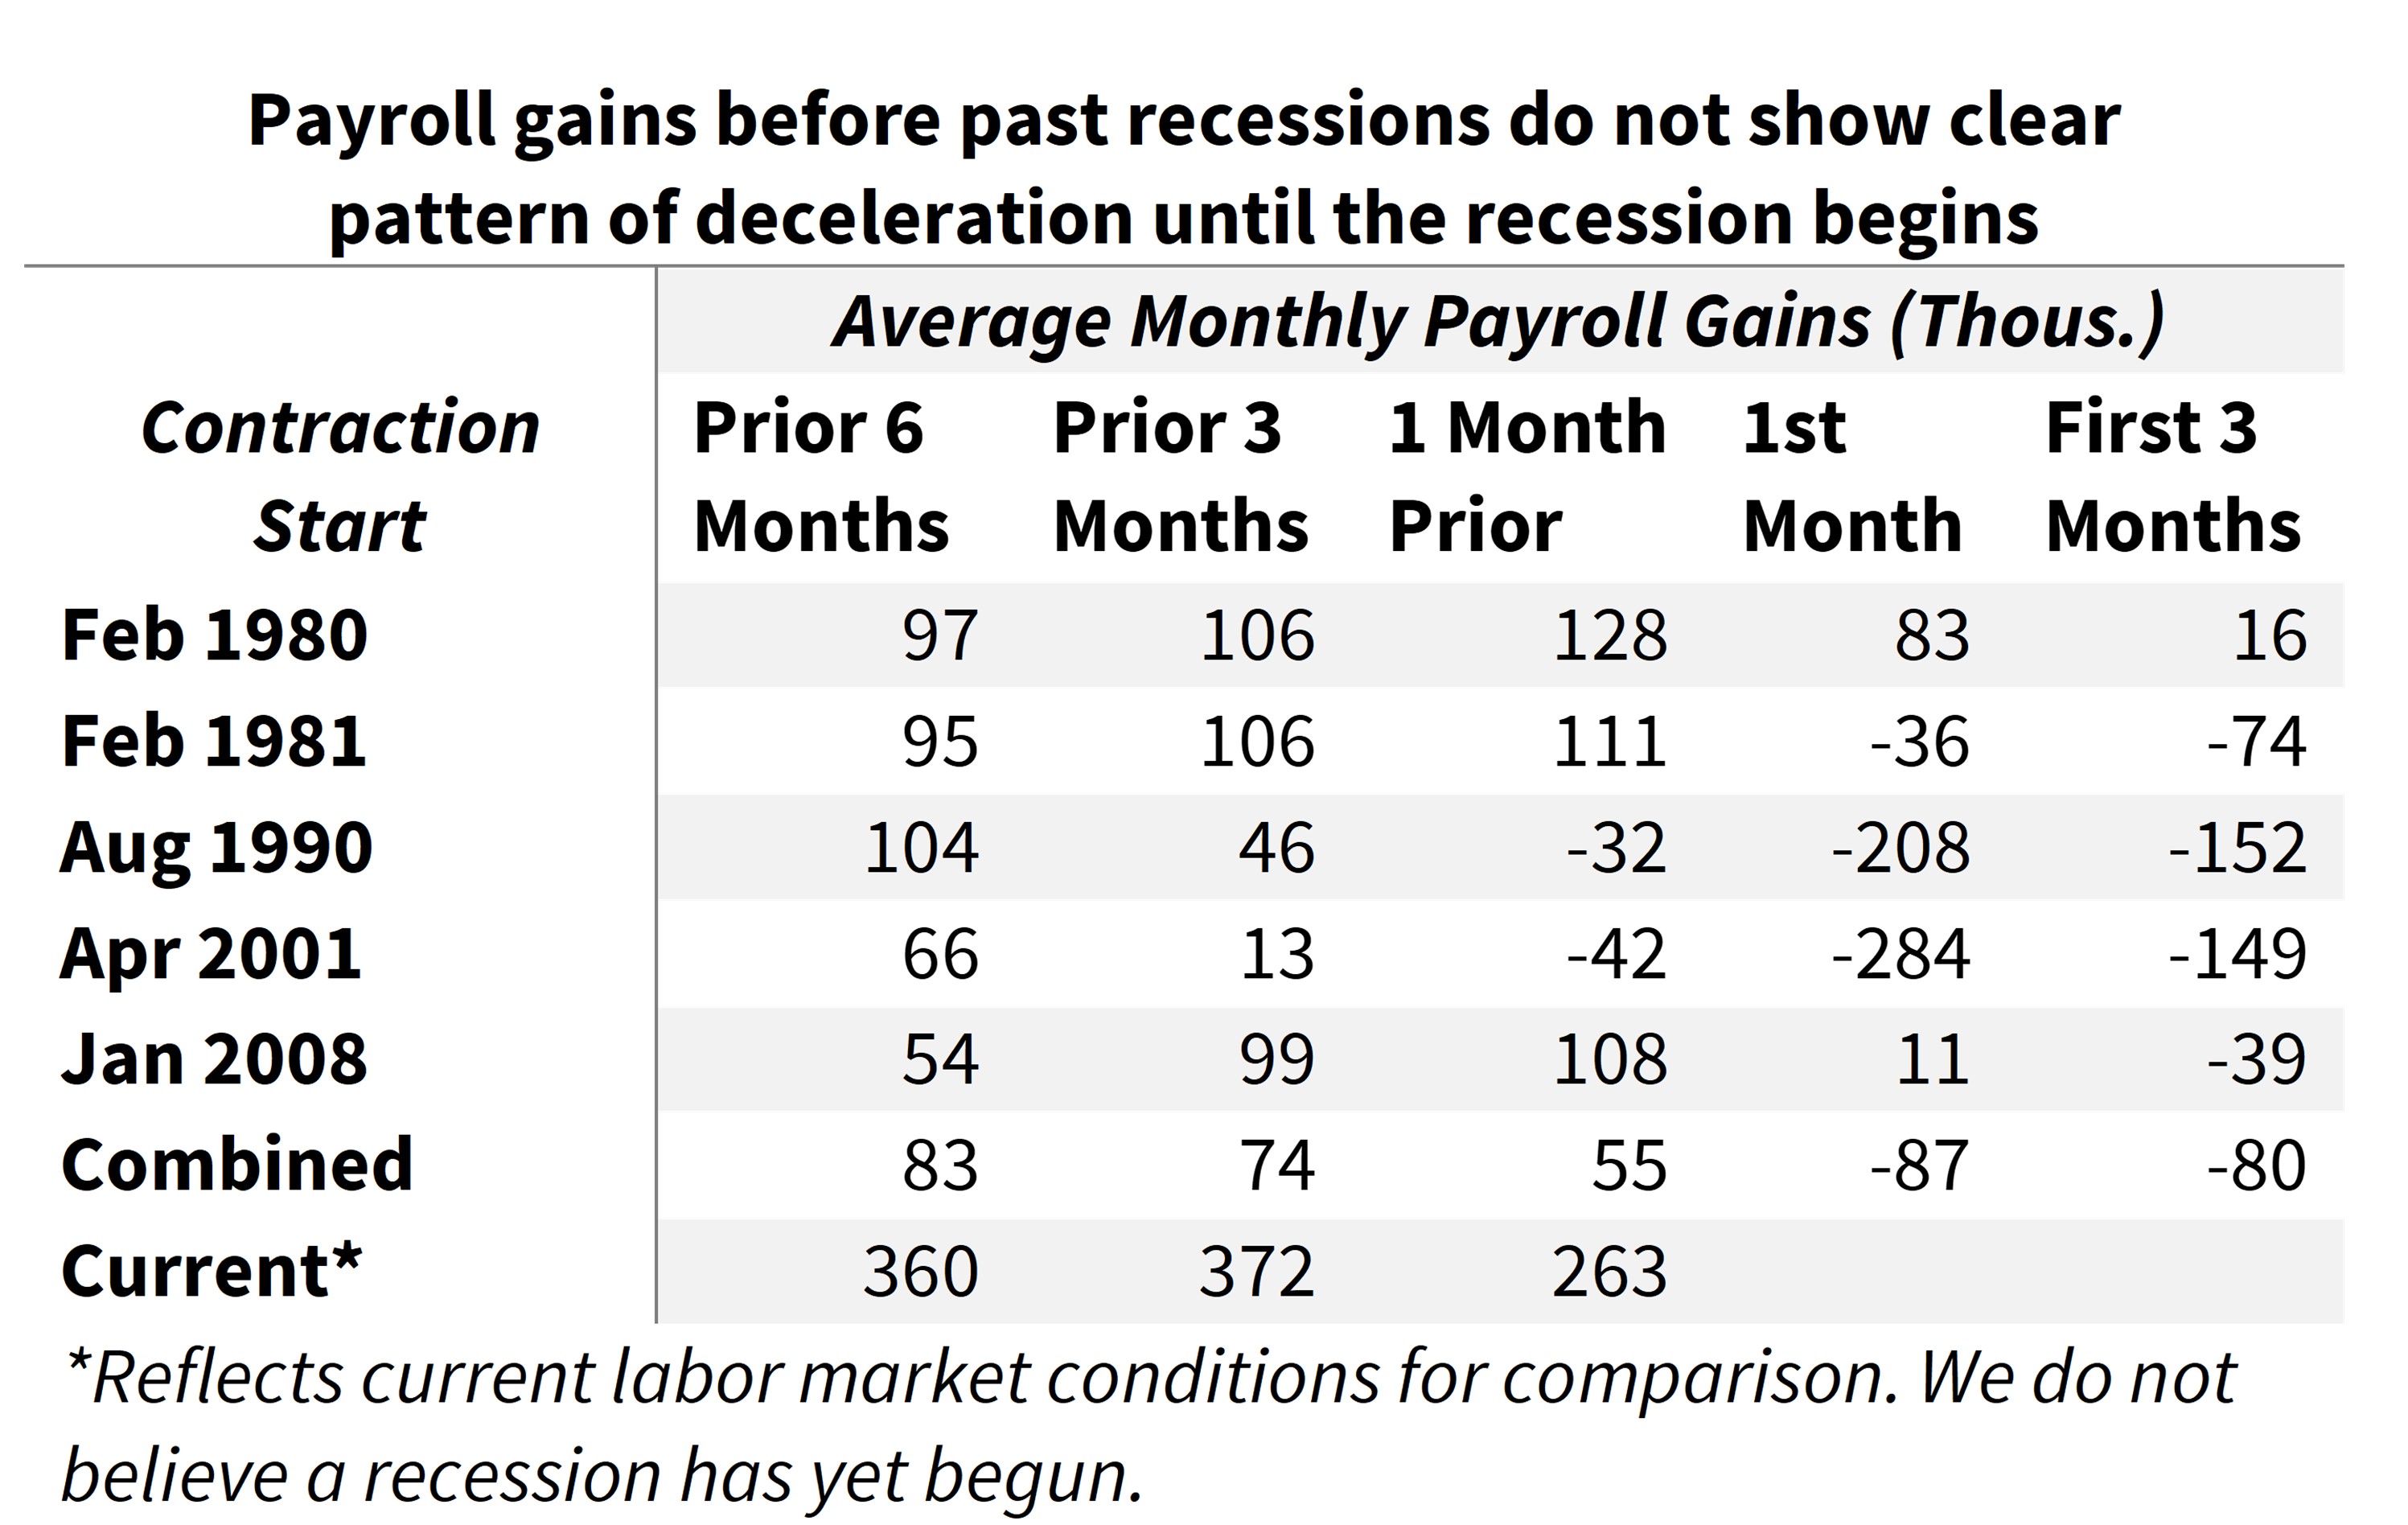  Payroll gains before past recessions do not show clear pattern of deceleration until the recession begins 